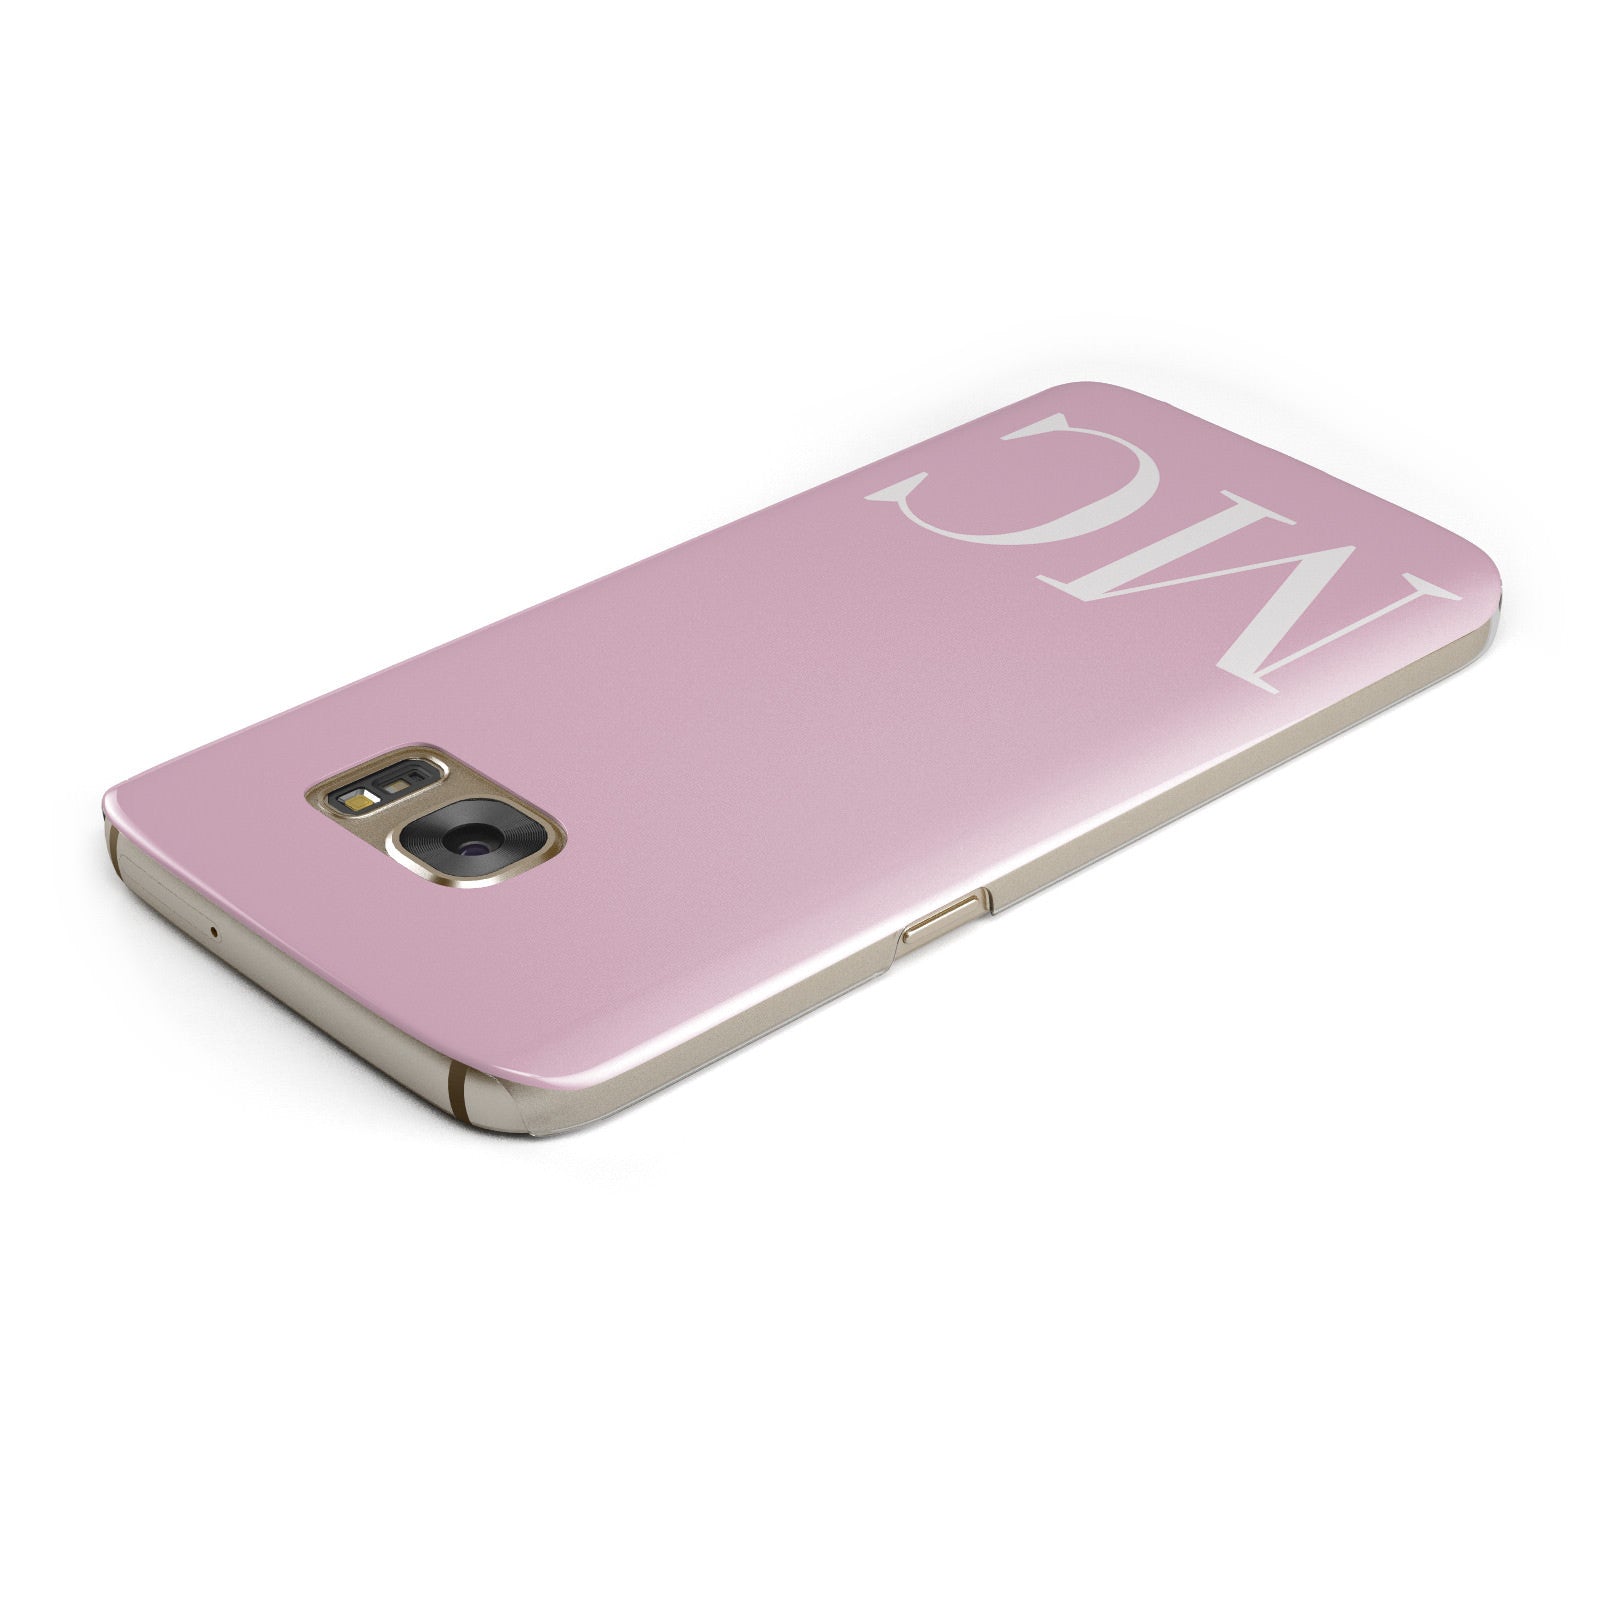 Initials Personalised 2 Samsung Galaxy Case Top Cutout